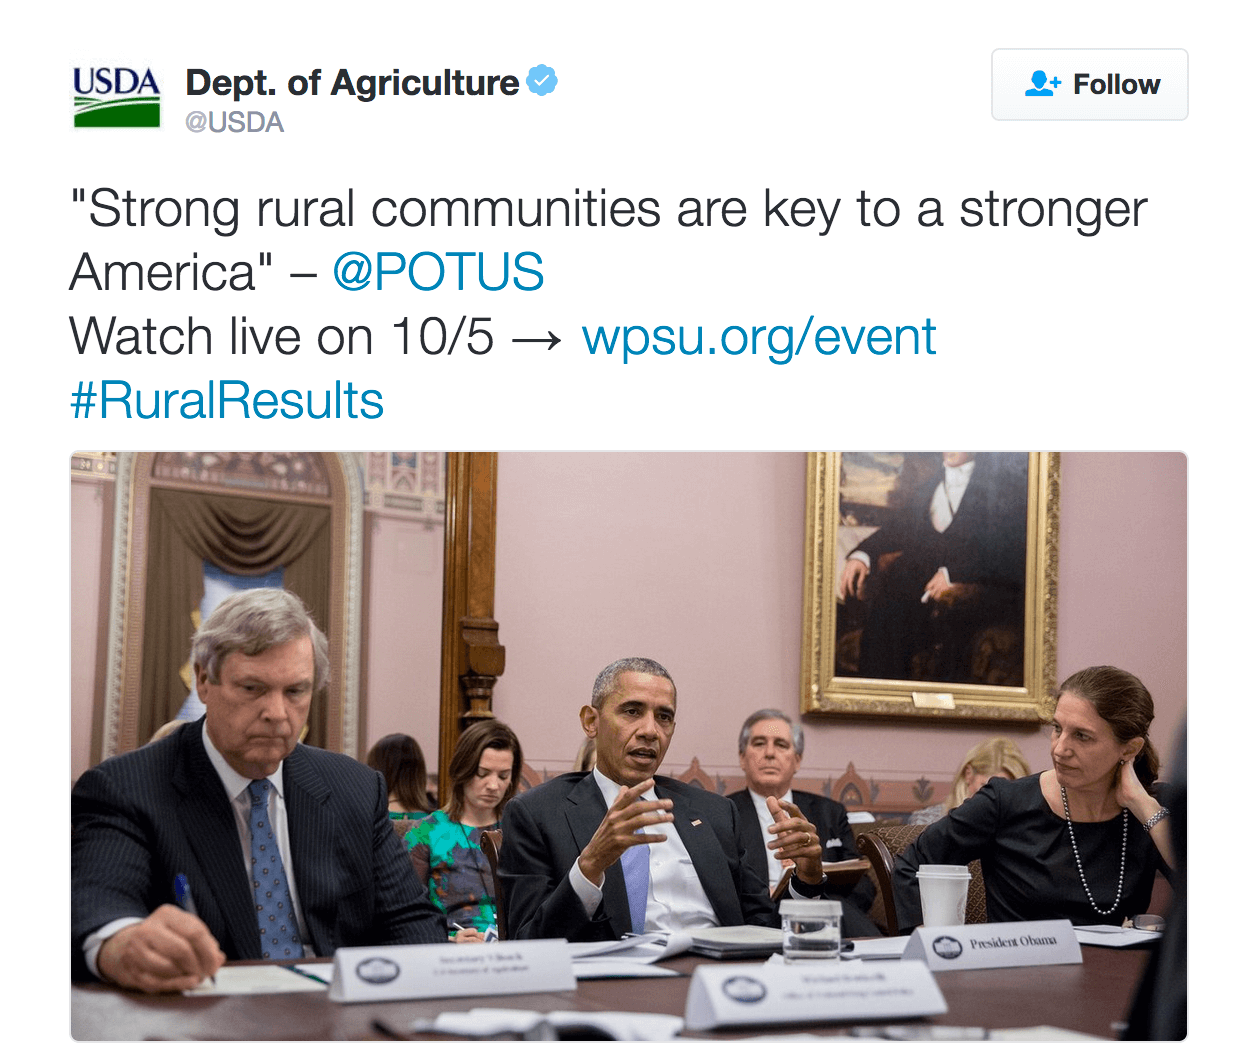 "Strong rural communities are key to a stronger America" – @POTUS Watch live on 10/5 → http://wpsu.org/event  #RuralResults